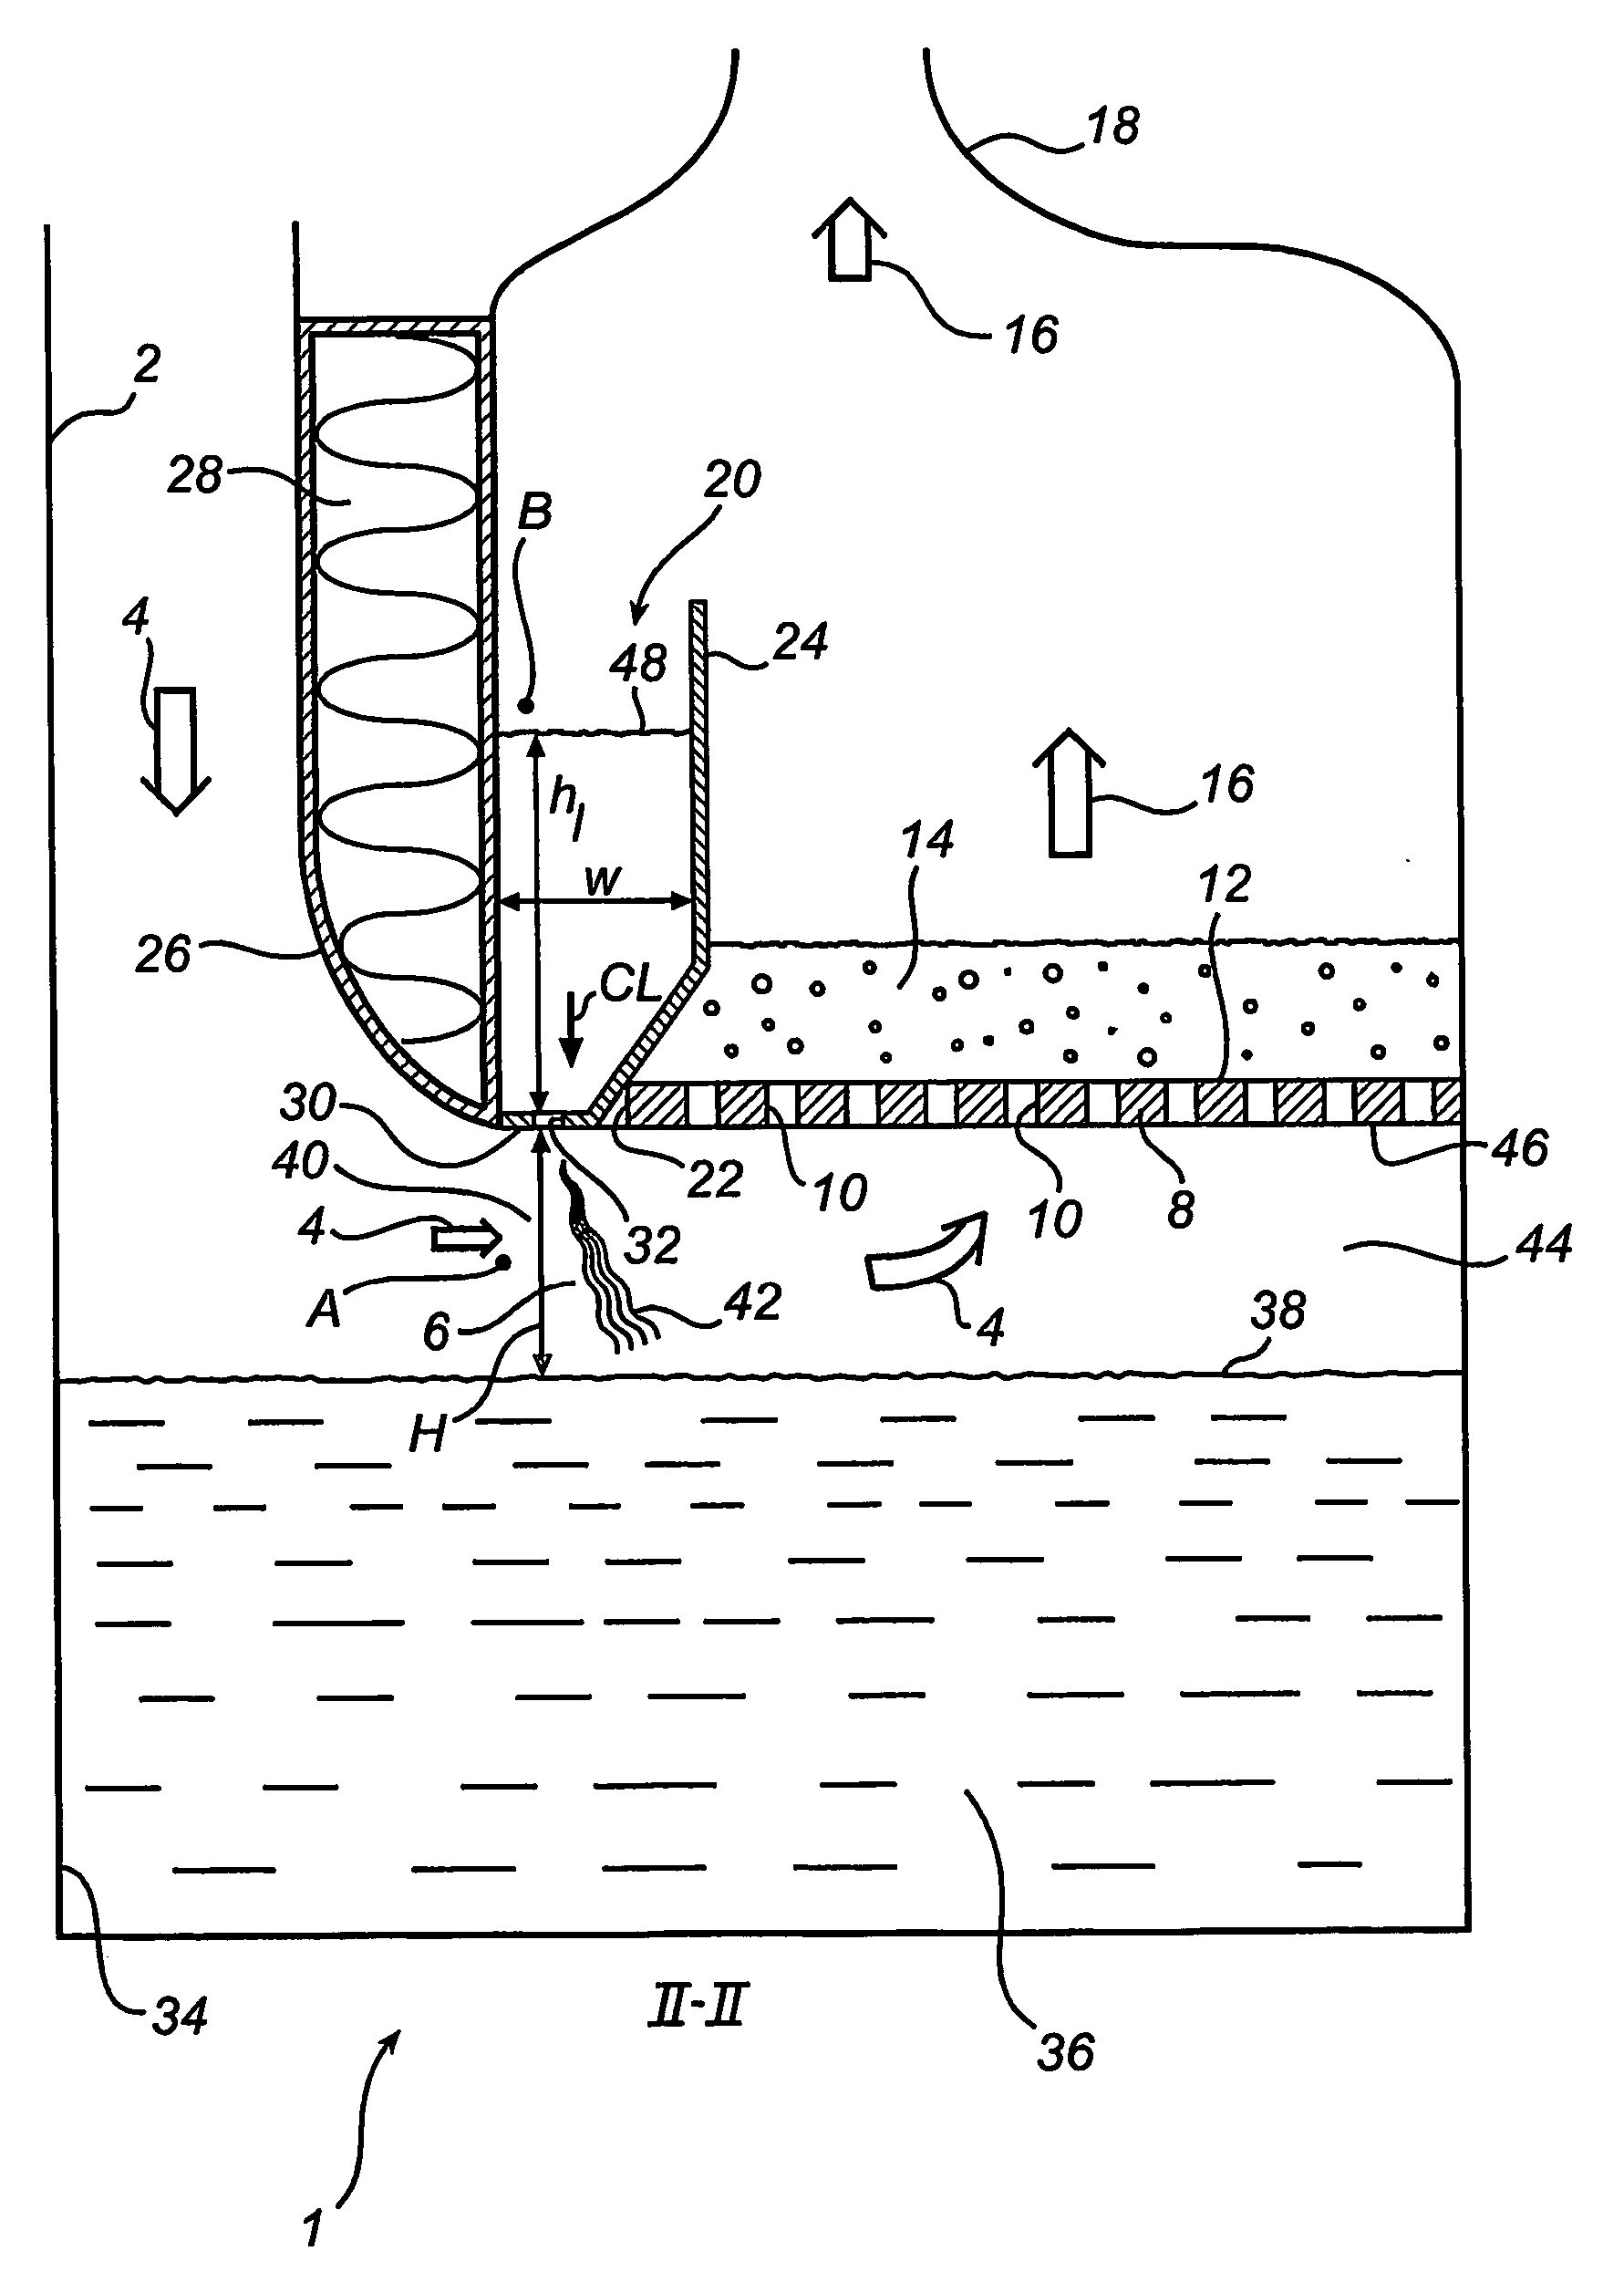 Method and device for separating sulphur dioxide from a gas